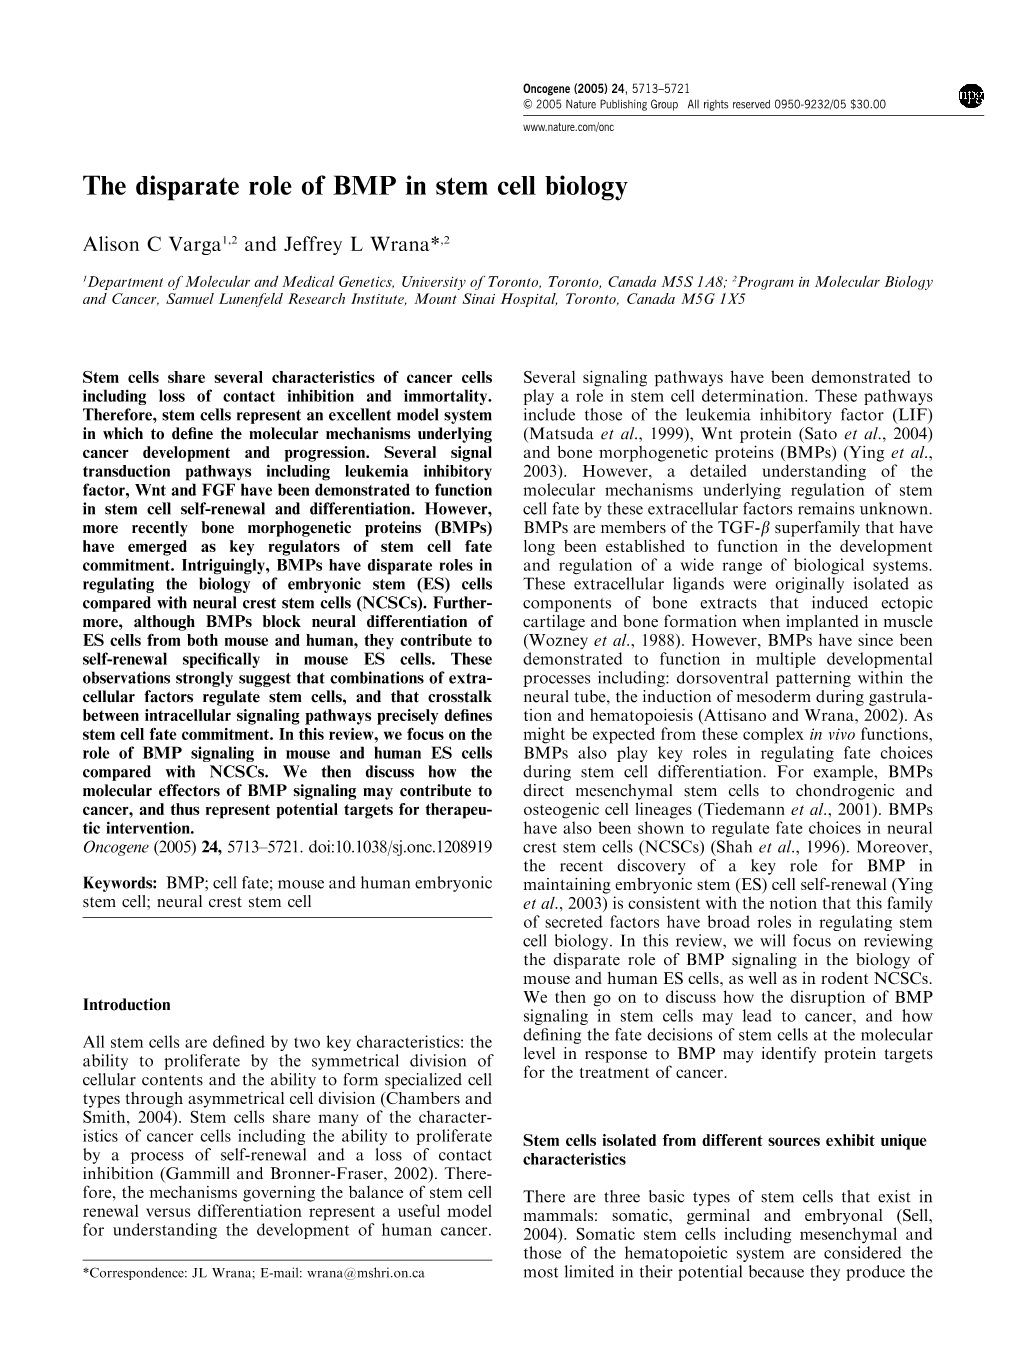 The Disparate Role of BMP in Stem Cell Biology